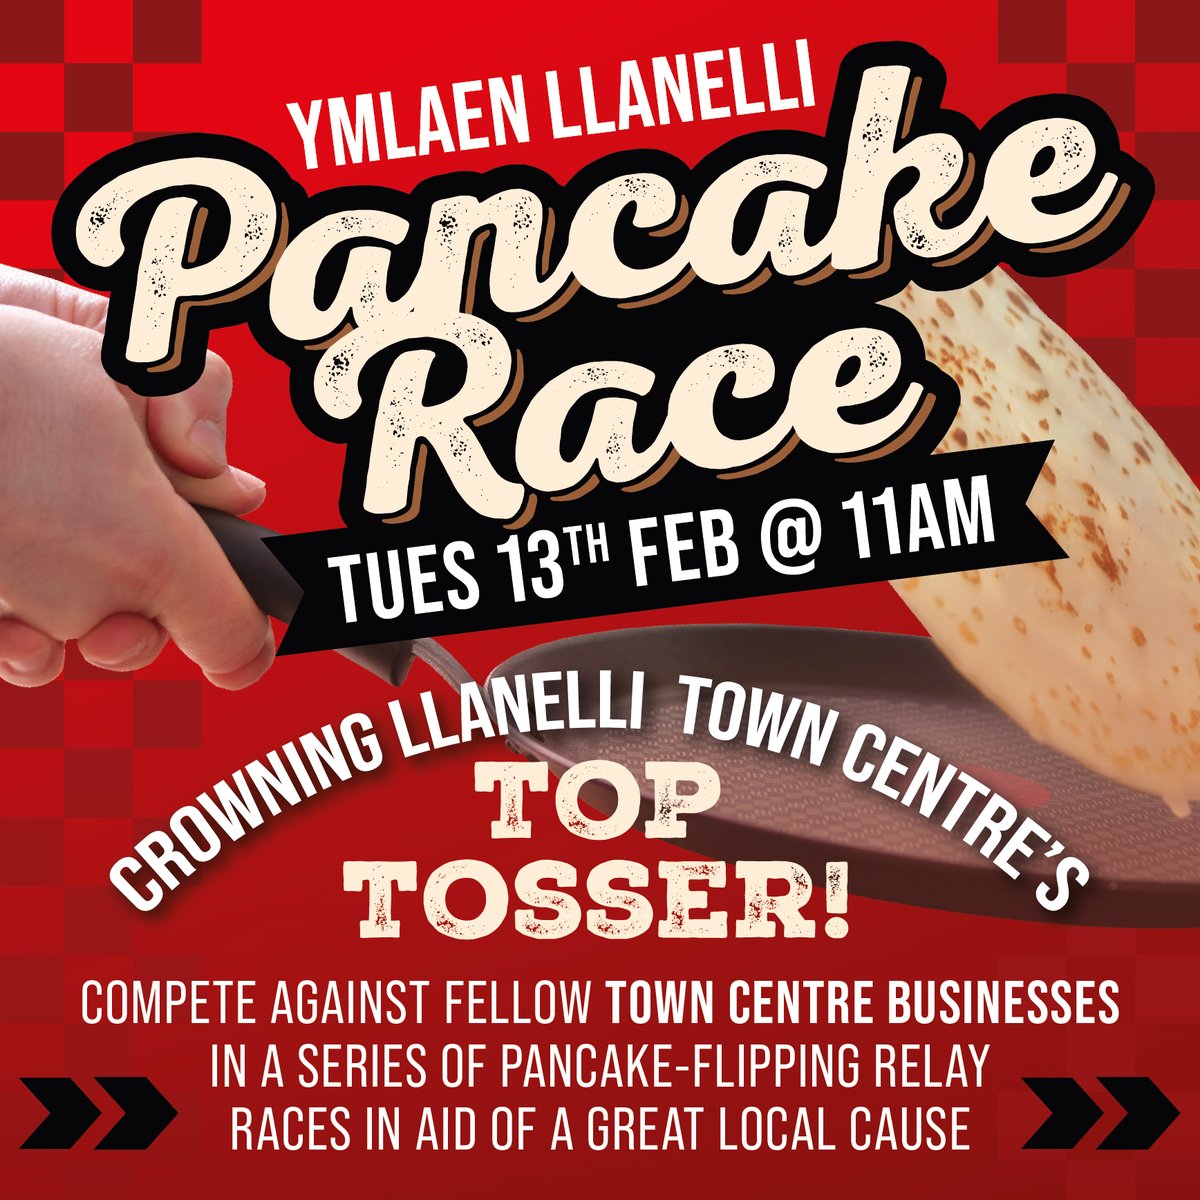 The annual Ymlaen Llanelli Pancake Race is today! Come along to Stepney Square at 11am and witness the fierce competition between our town centre businesses! Who will be this year's top tosser? And who will be an absolute flop? We'll find out in a couple of hours! 👑👀